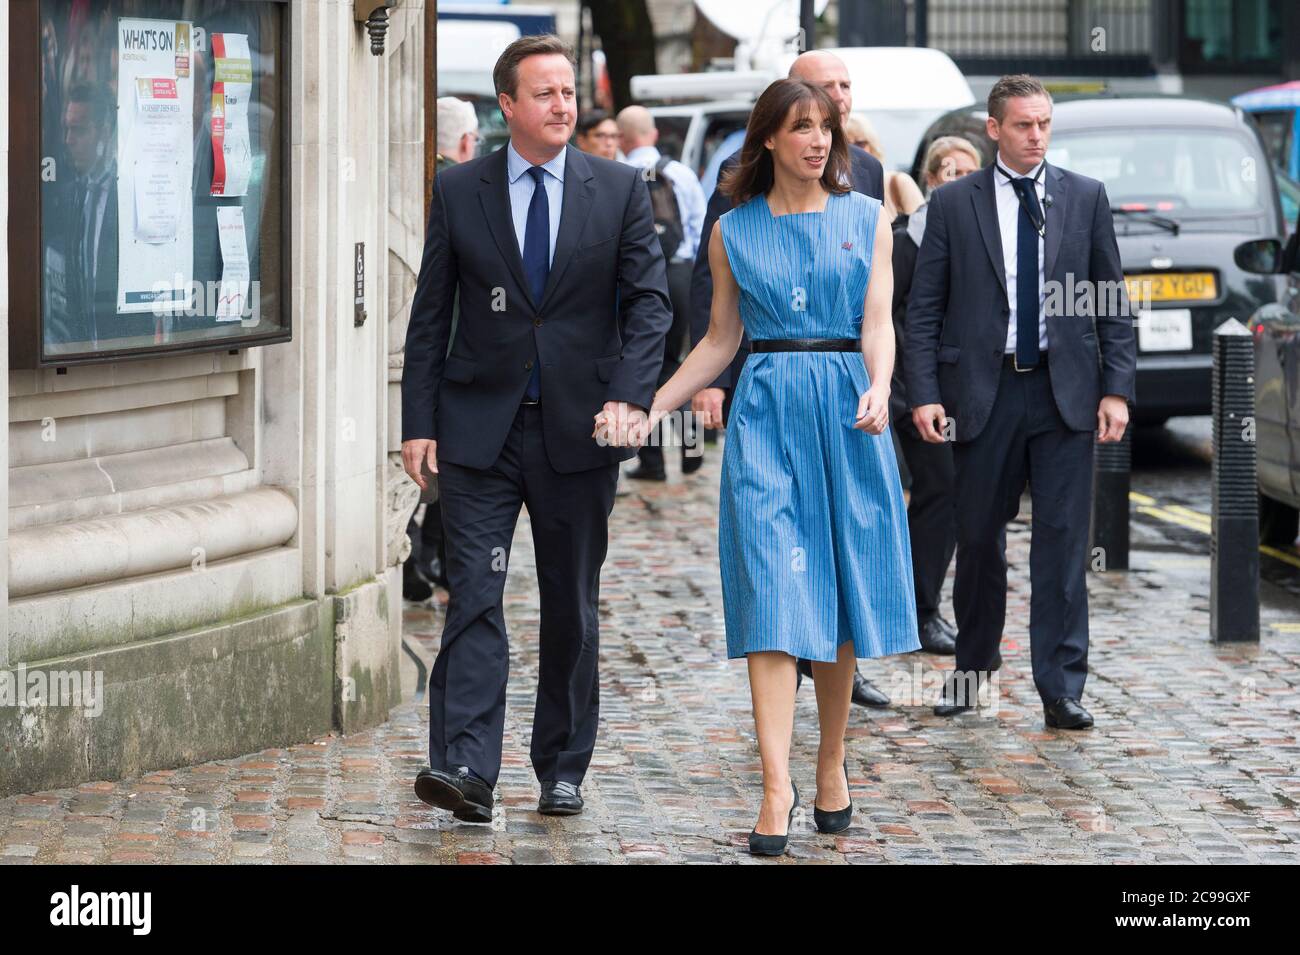 British Prime Minister David Cameron arriving with his wife Samantha to vote in the British referendum on whether to remain part of European Union or leave, Methodist Central Hall Westminster, London, UK.  23 Jun 2016 Stock Photo